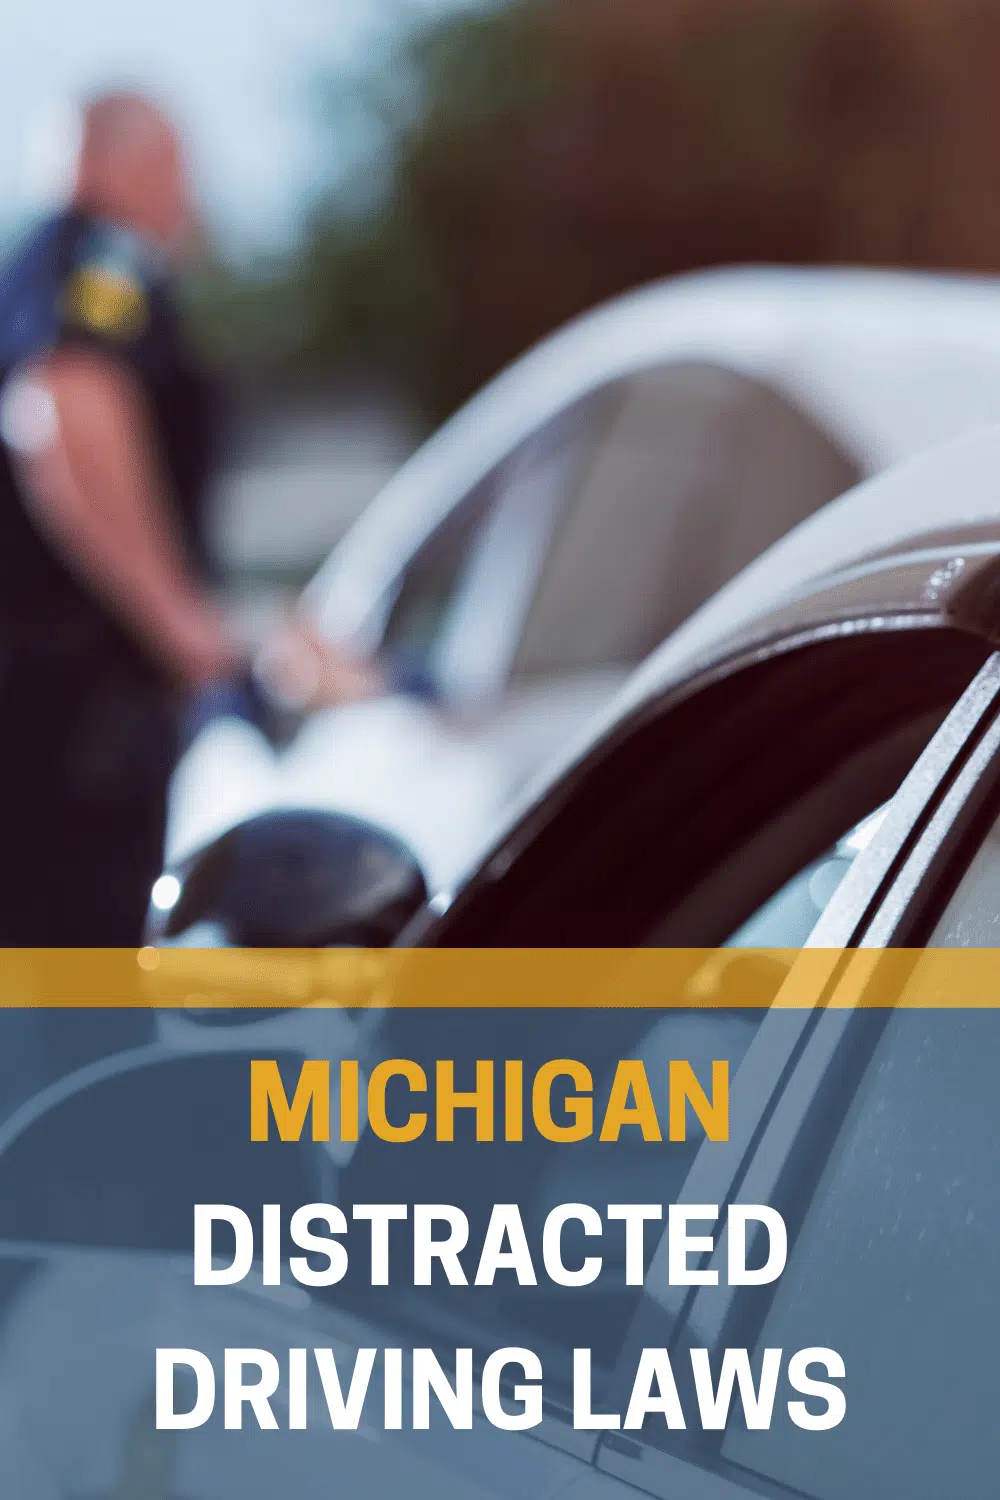 Michigan Distracted Driving Laws: What You Need To Know